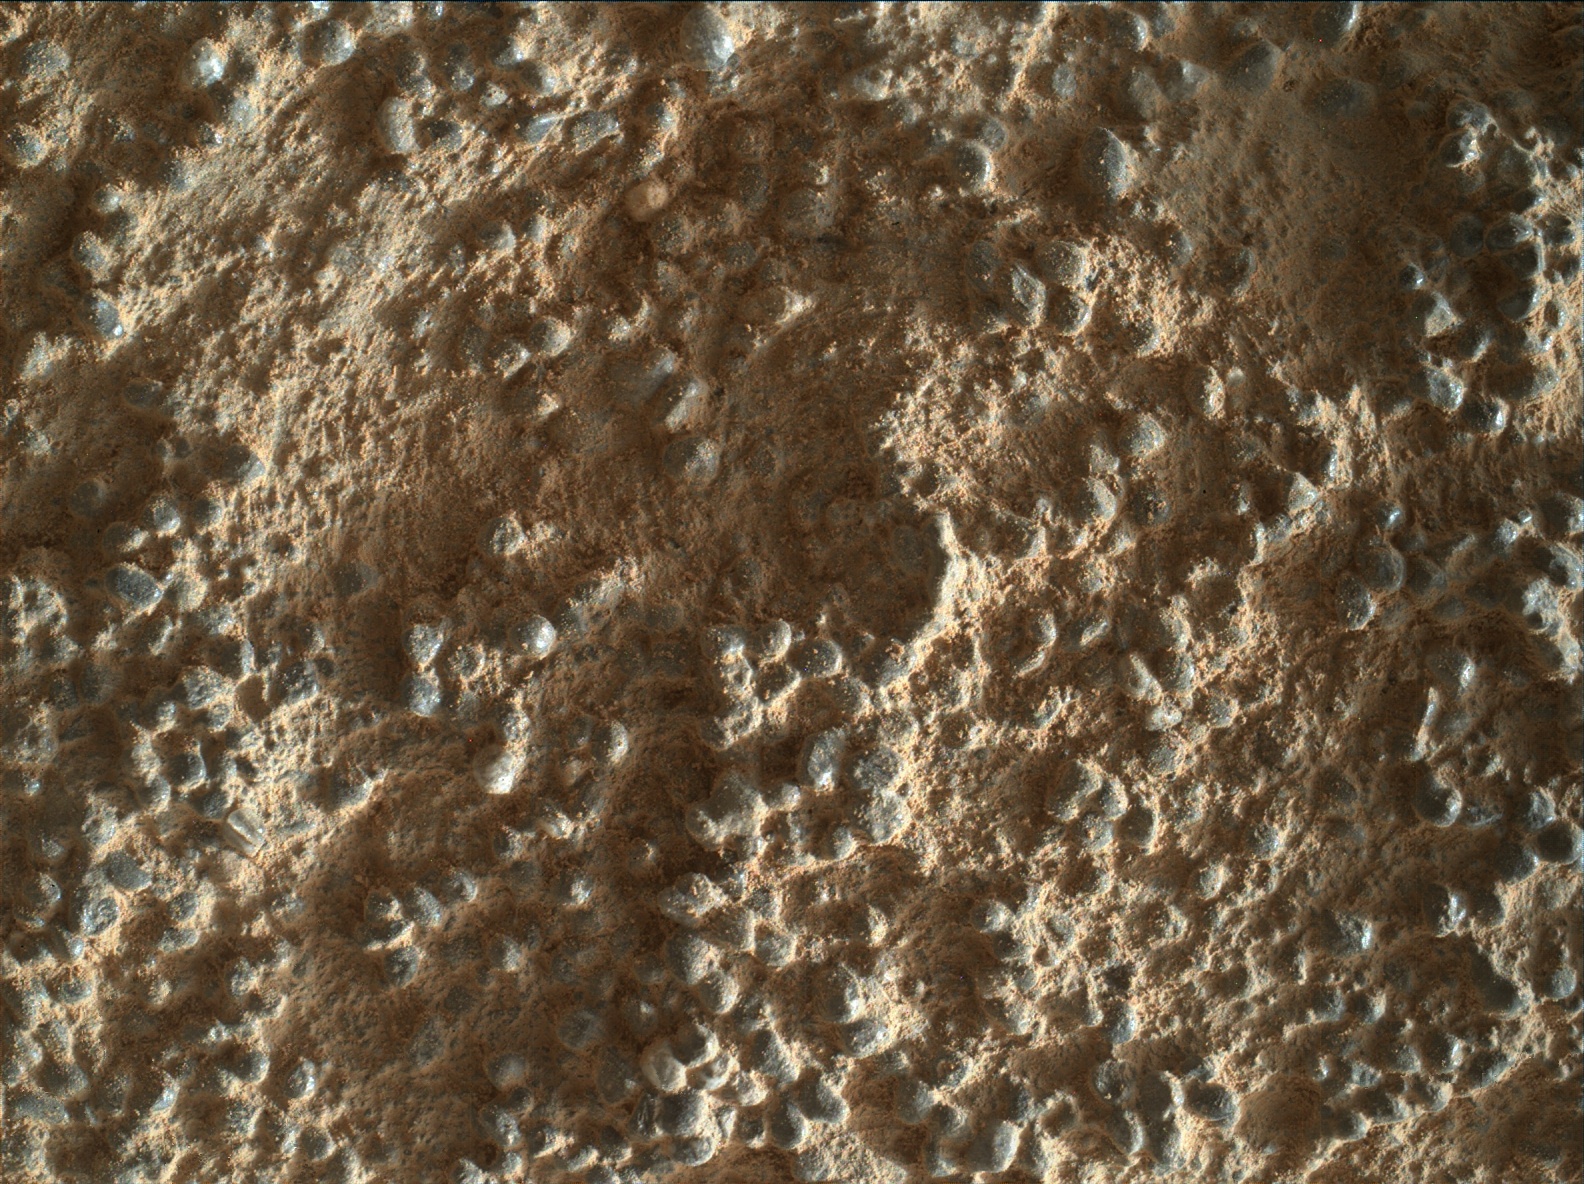 Nasa's Mars rover Curiosity acquired this image using its Mars Hand Lens Imager (MAHLI) on Sol 1348